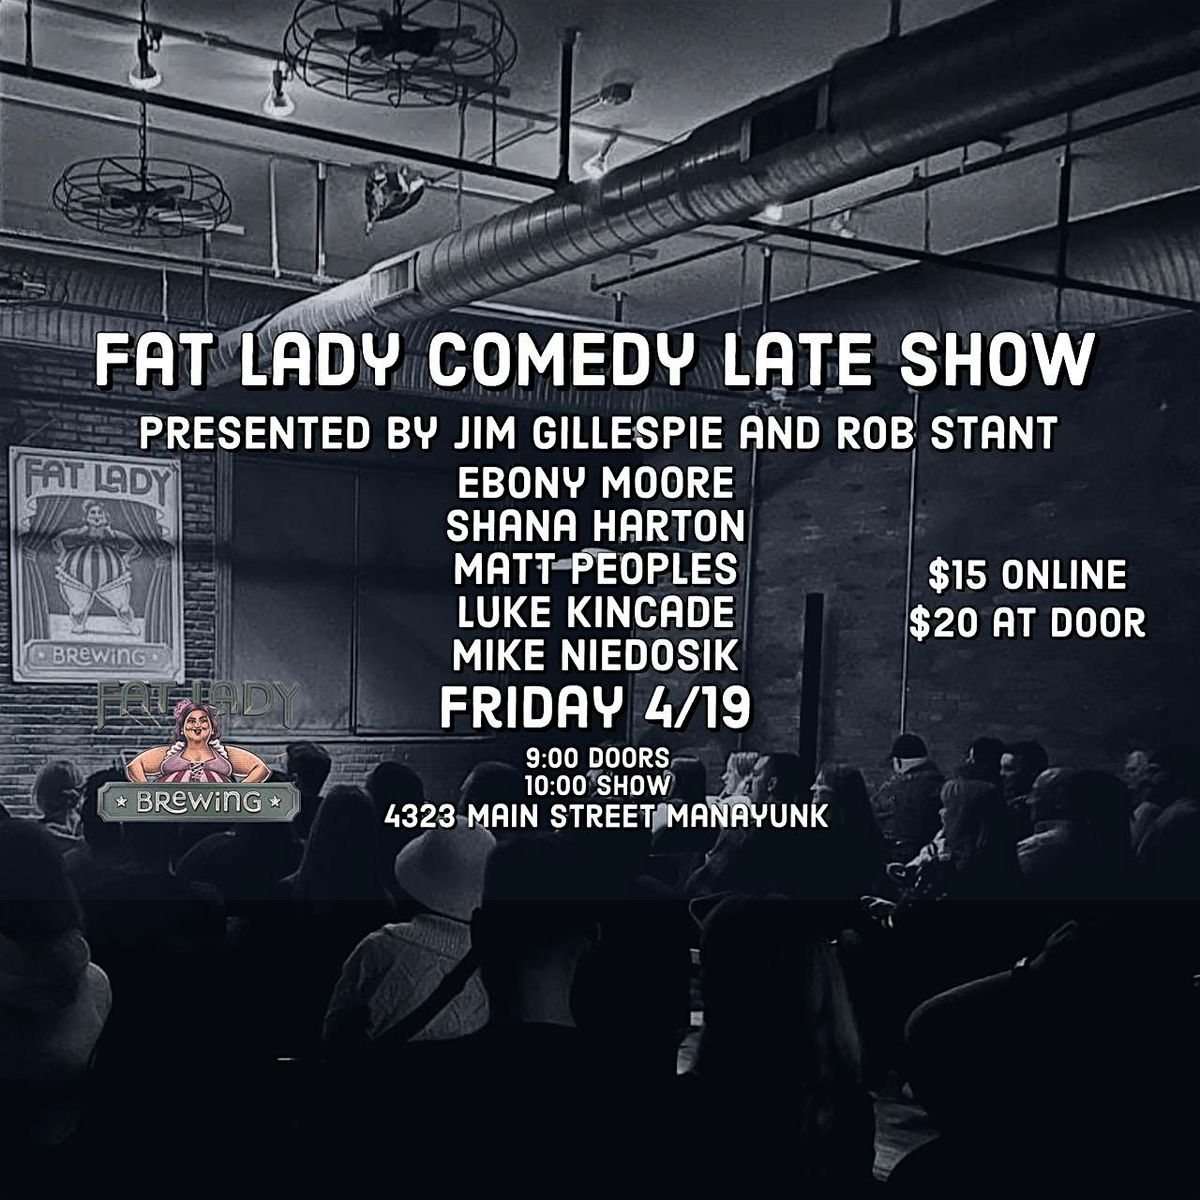 Fat Lady Comedy Late Show hosted by Rob Stant and Jim Gillespie